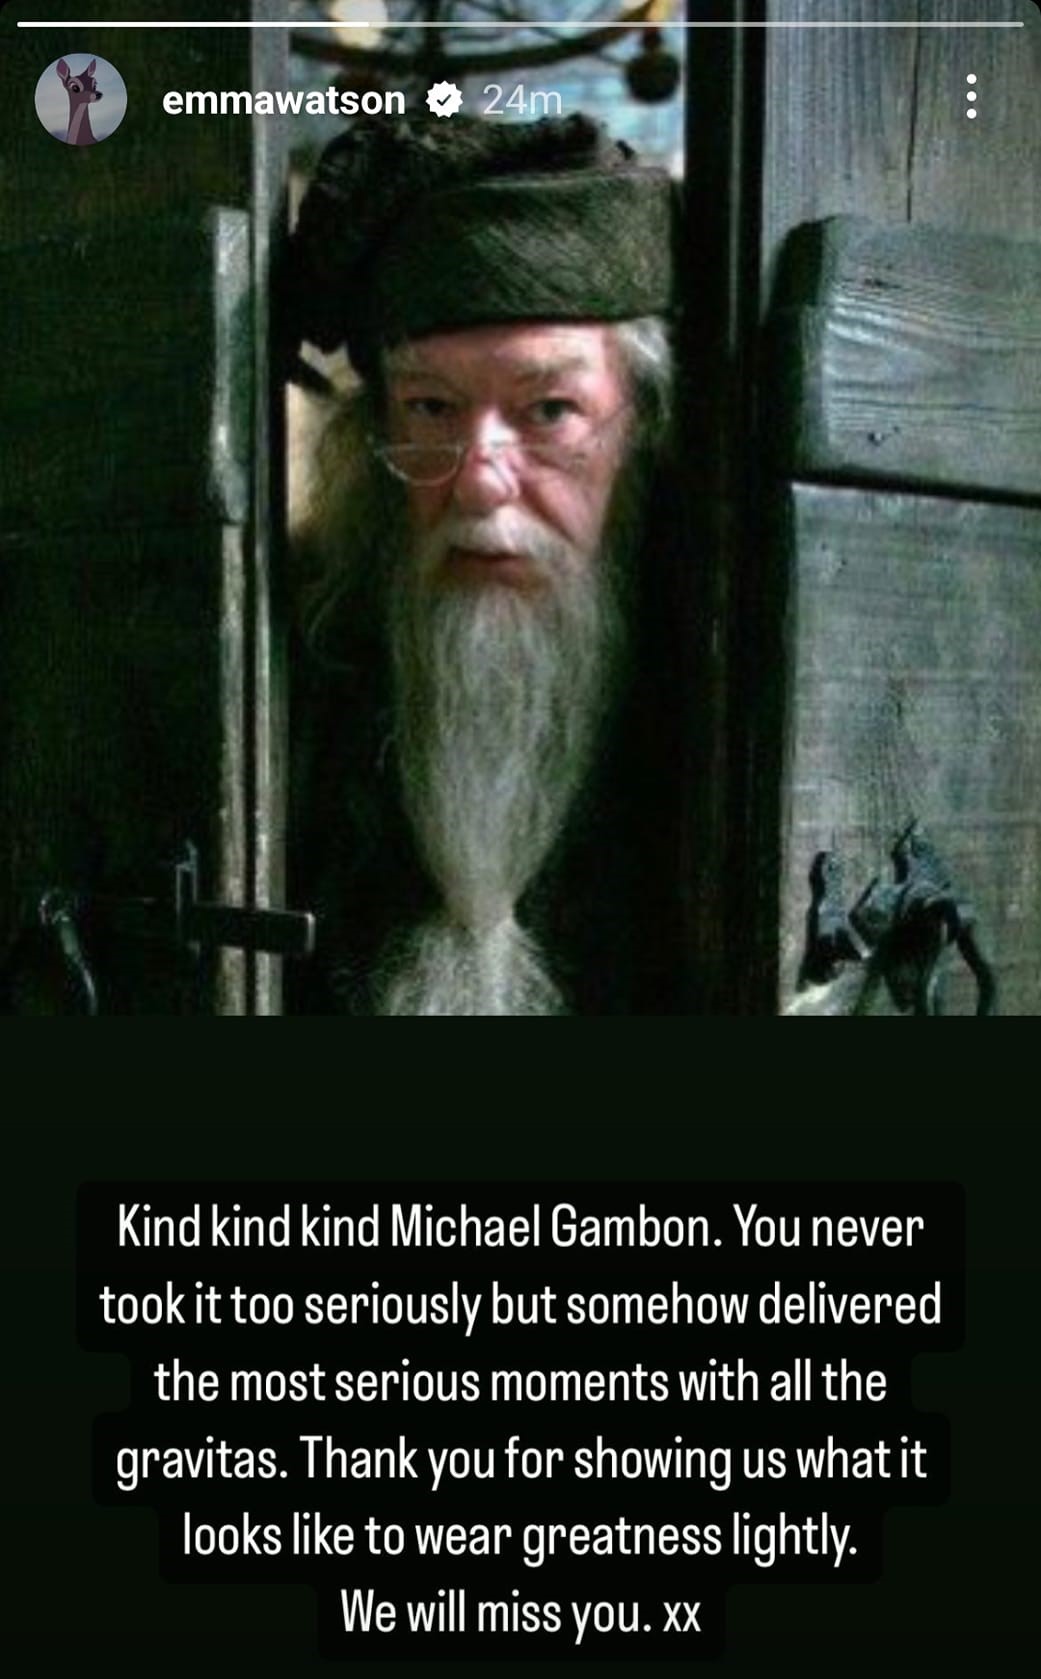 Image of Dumbledore in "Prisoner of Azkban" with caption: "Kind kind kind Michael Gambon. You never took it too seriously but somehow delivered the most serious moments with all the gravitas. Thank you for showing us what it looks like to wear greatness lightly. We will miss you. xx"